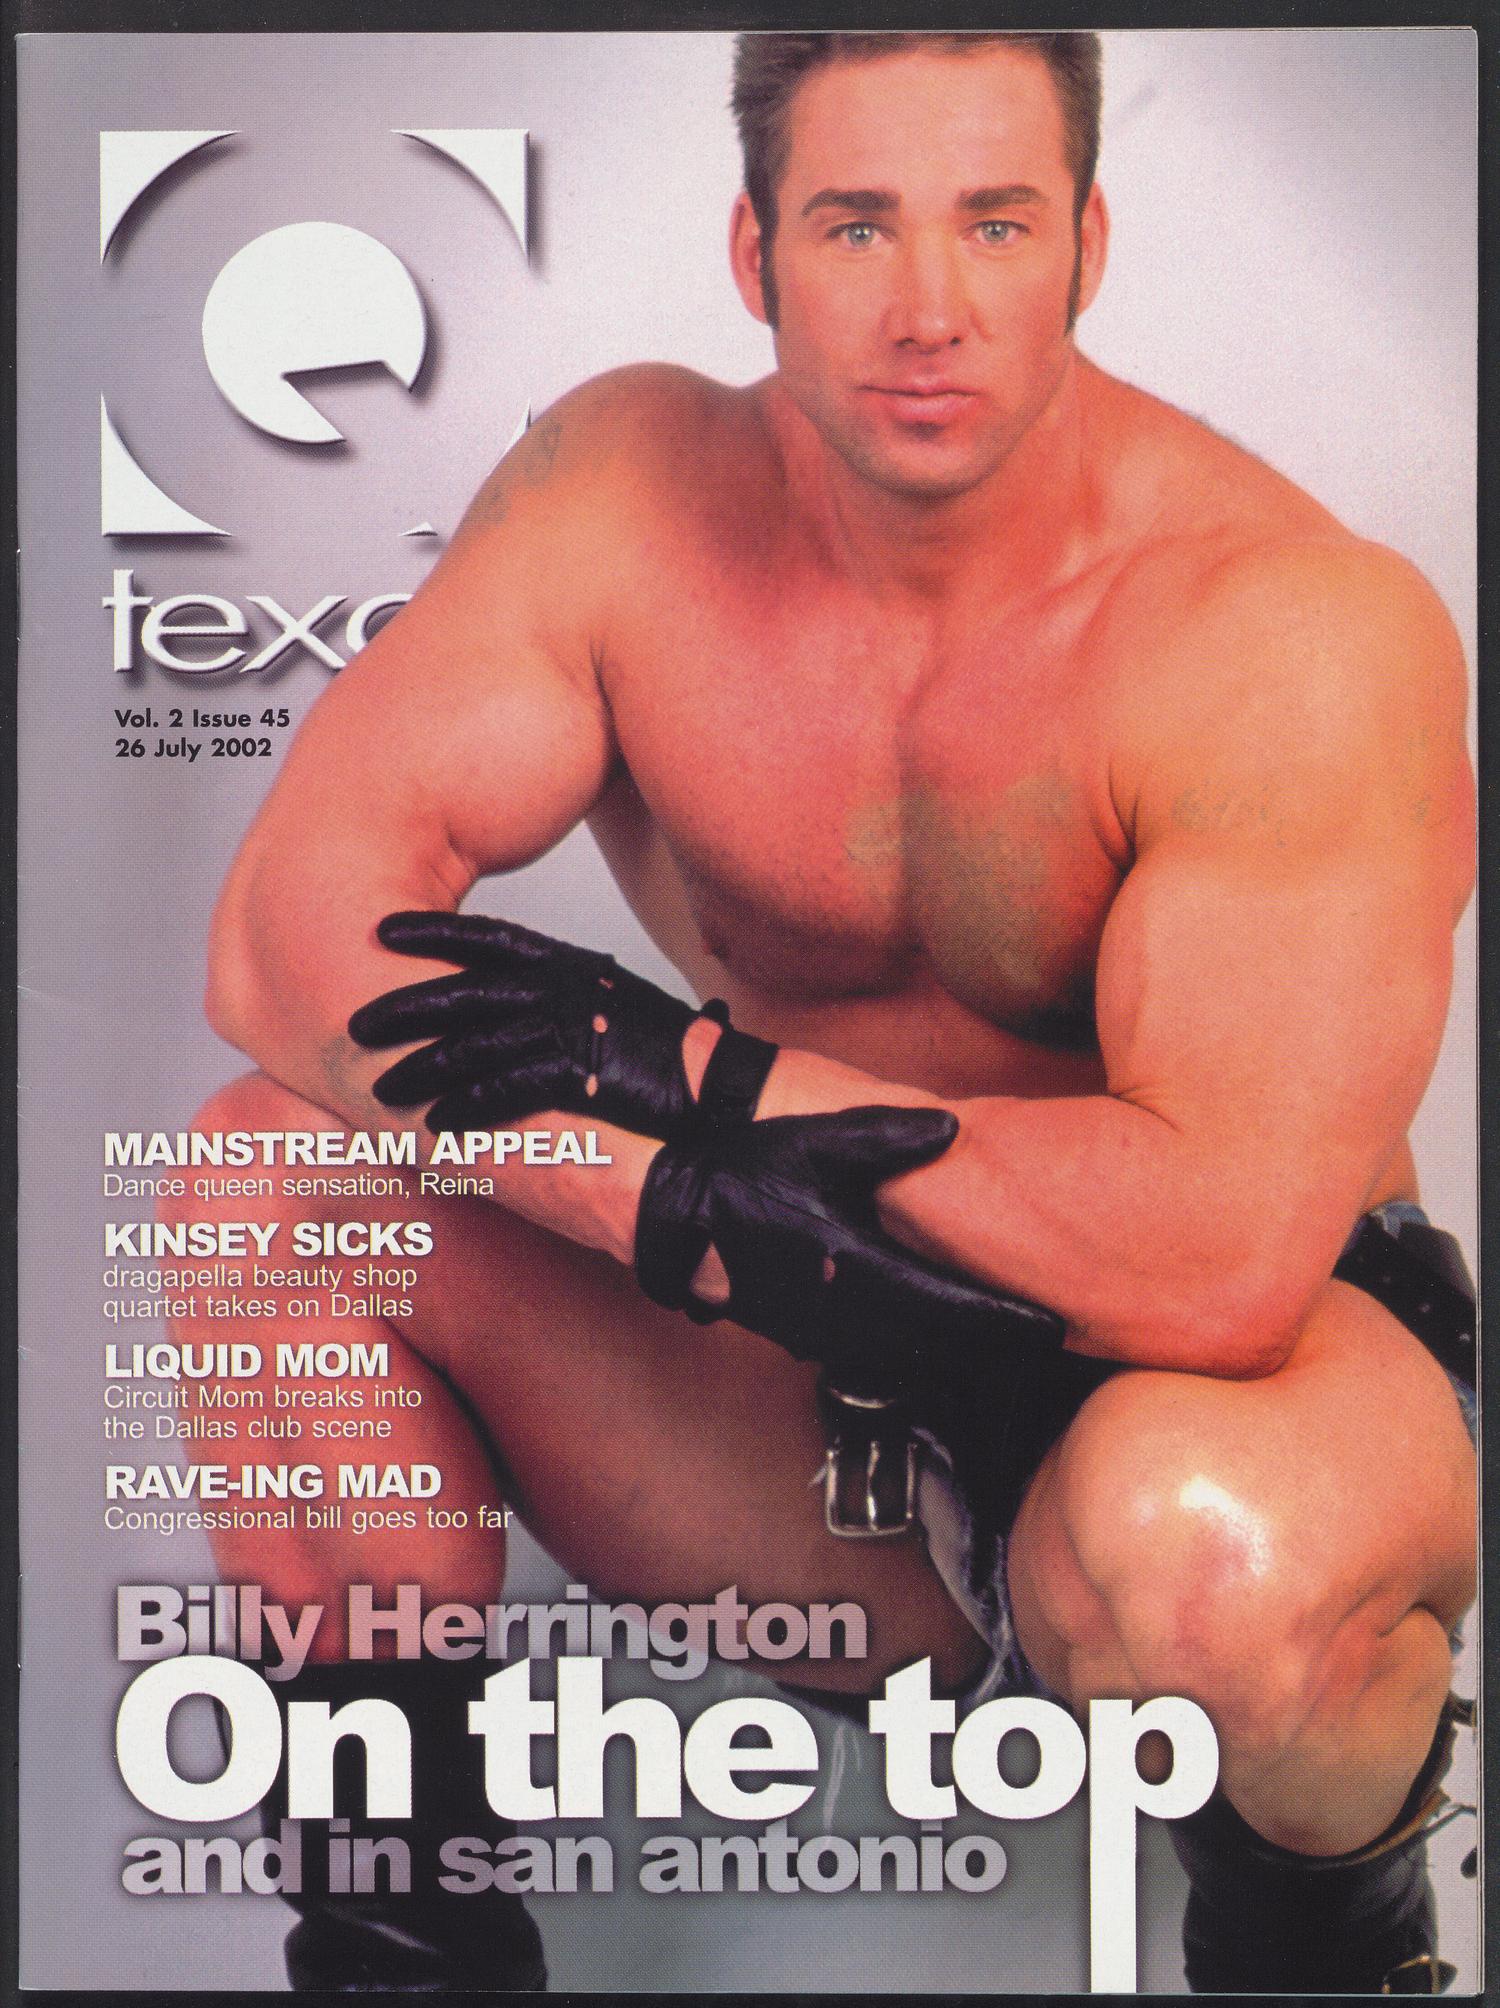 Qtexas, Volume 2, Issue 45, July 26, 2002
                                                
                                                    Front Cover
                                                